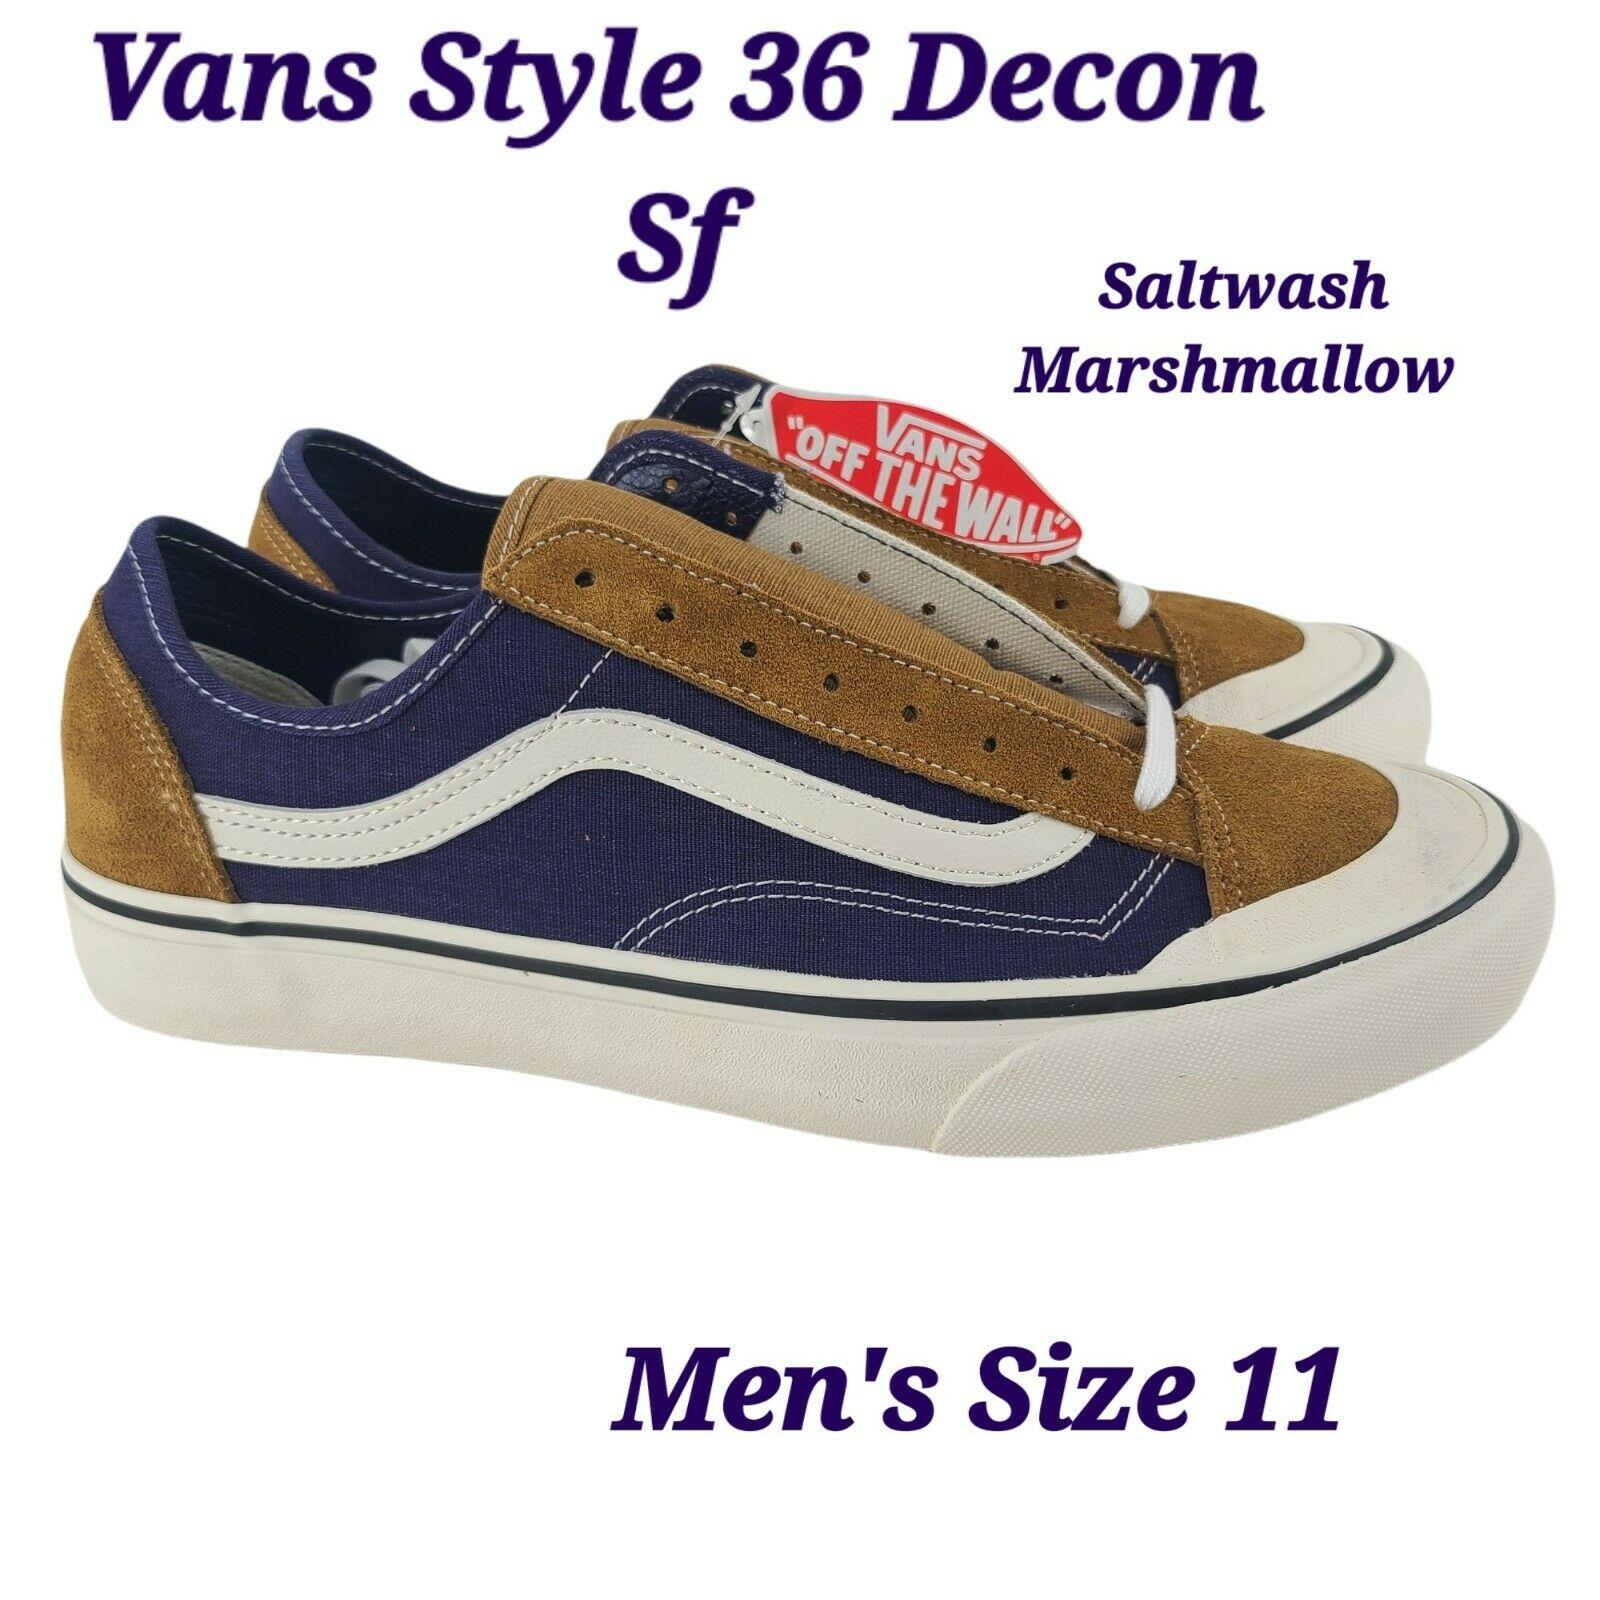 Vans Salt Wash Style 36 Decon SF Skate Shoes Sneakers VN0A5HYRA0S US Mens 11